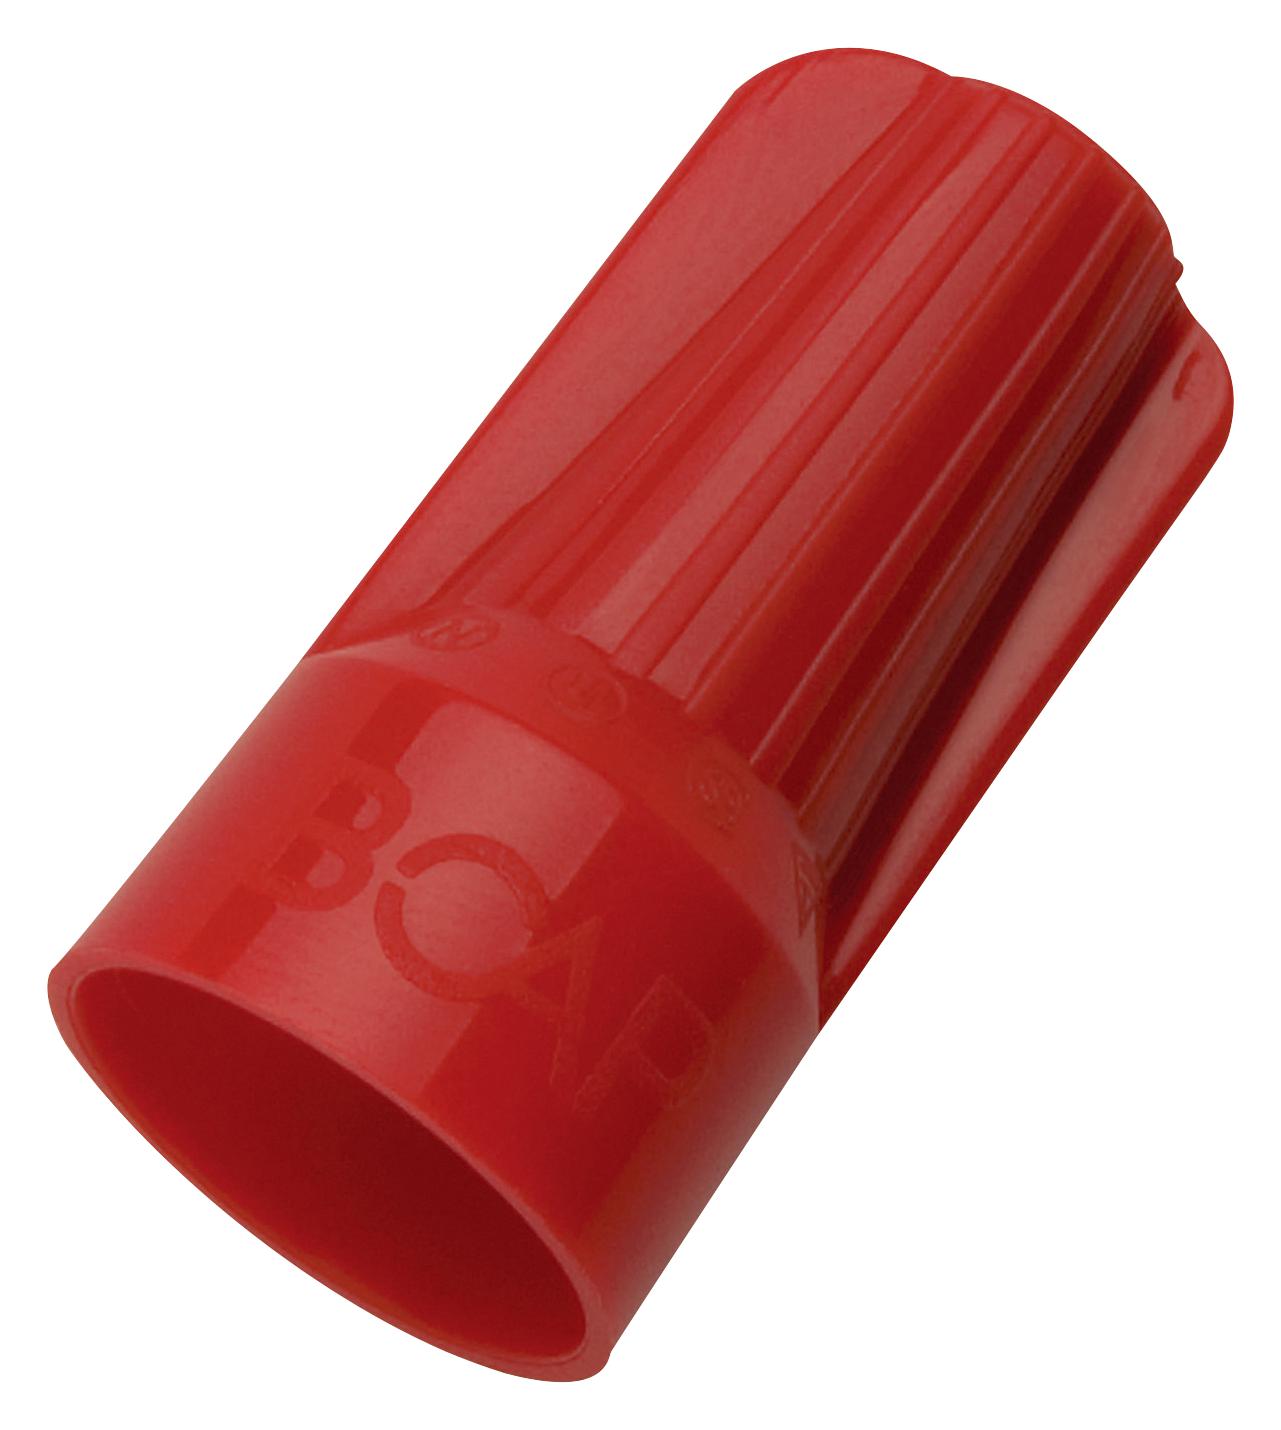 Ideal B2-1 Terminal, Connector, Twist On, Red, 22-8Awg